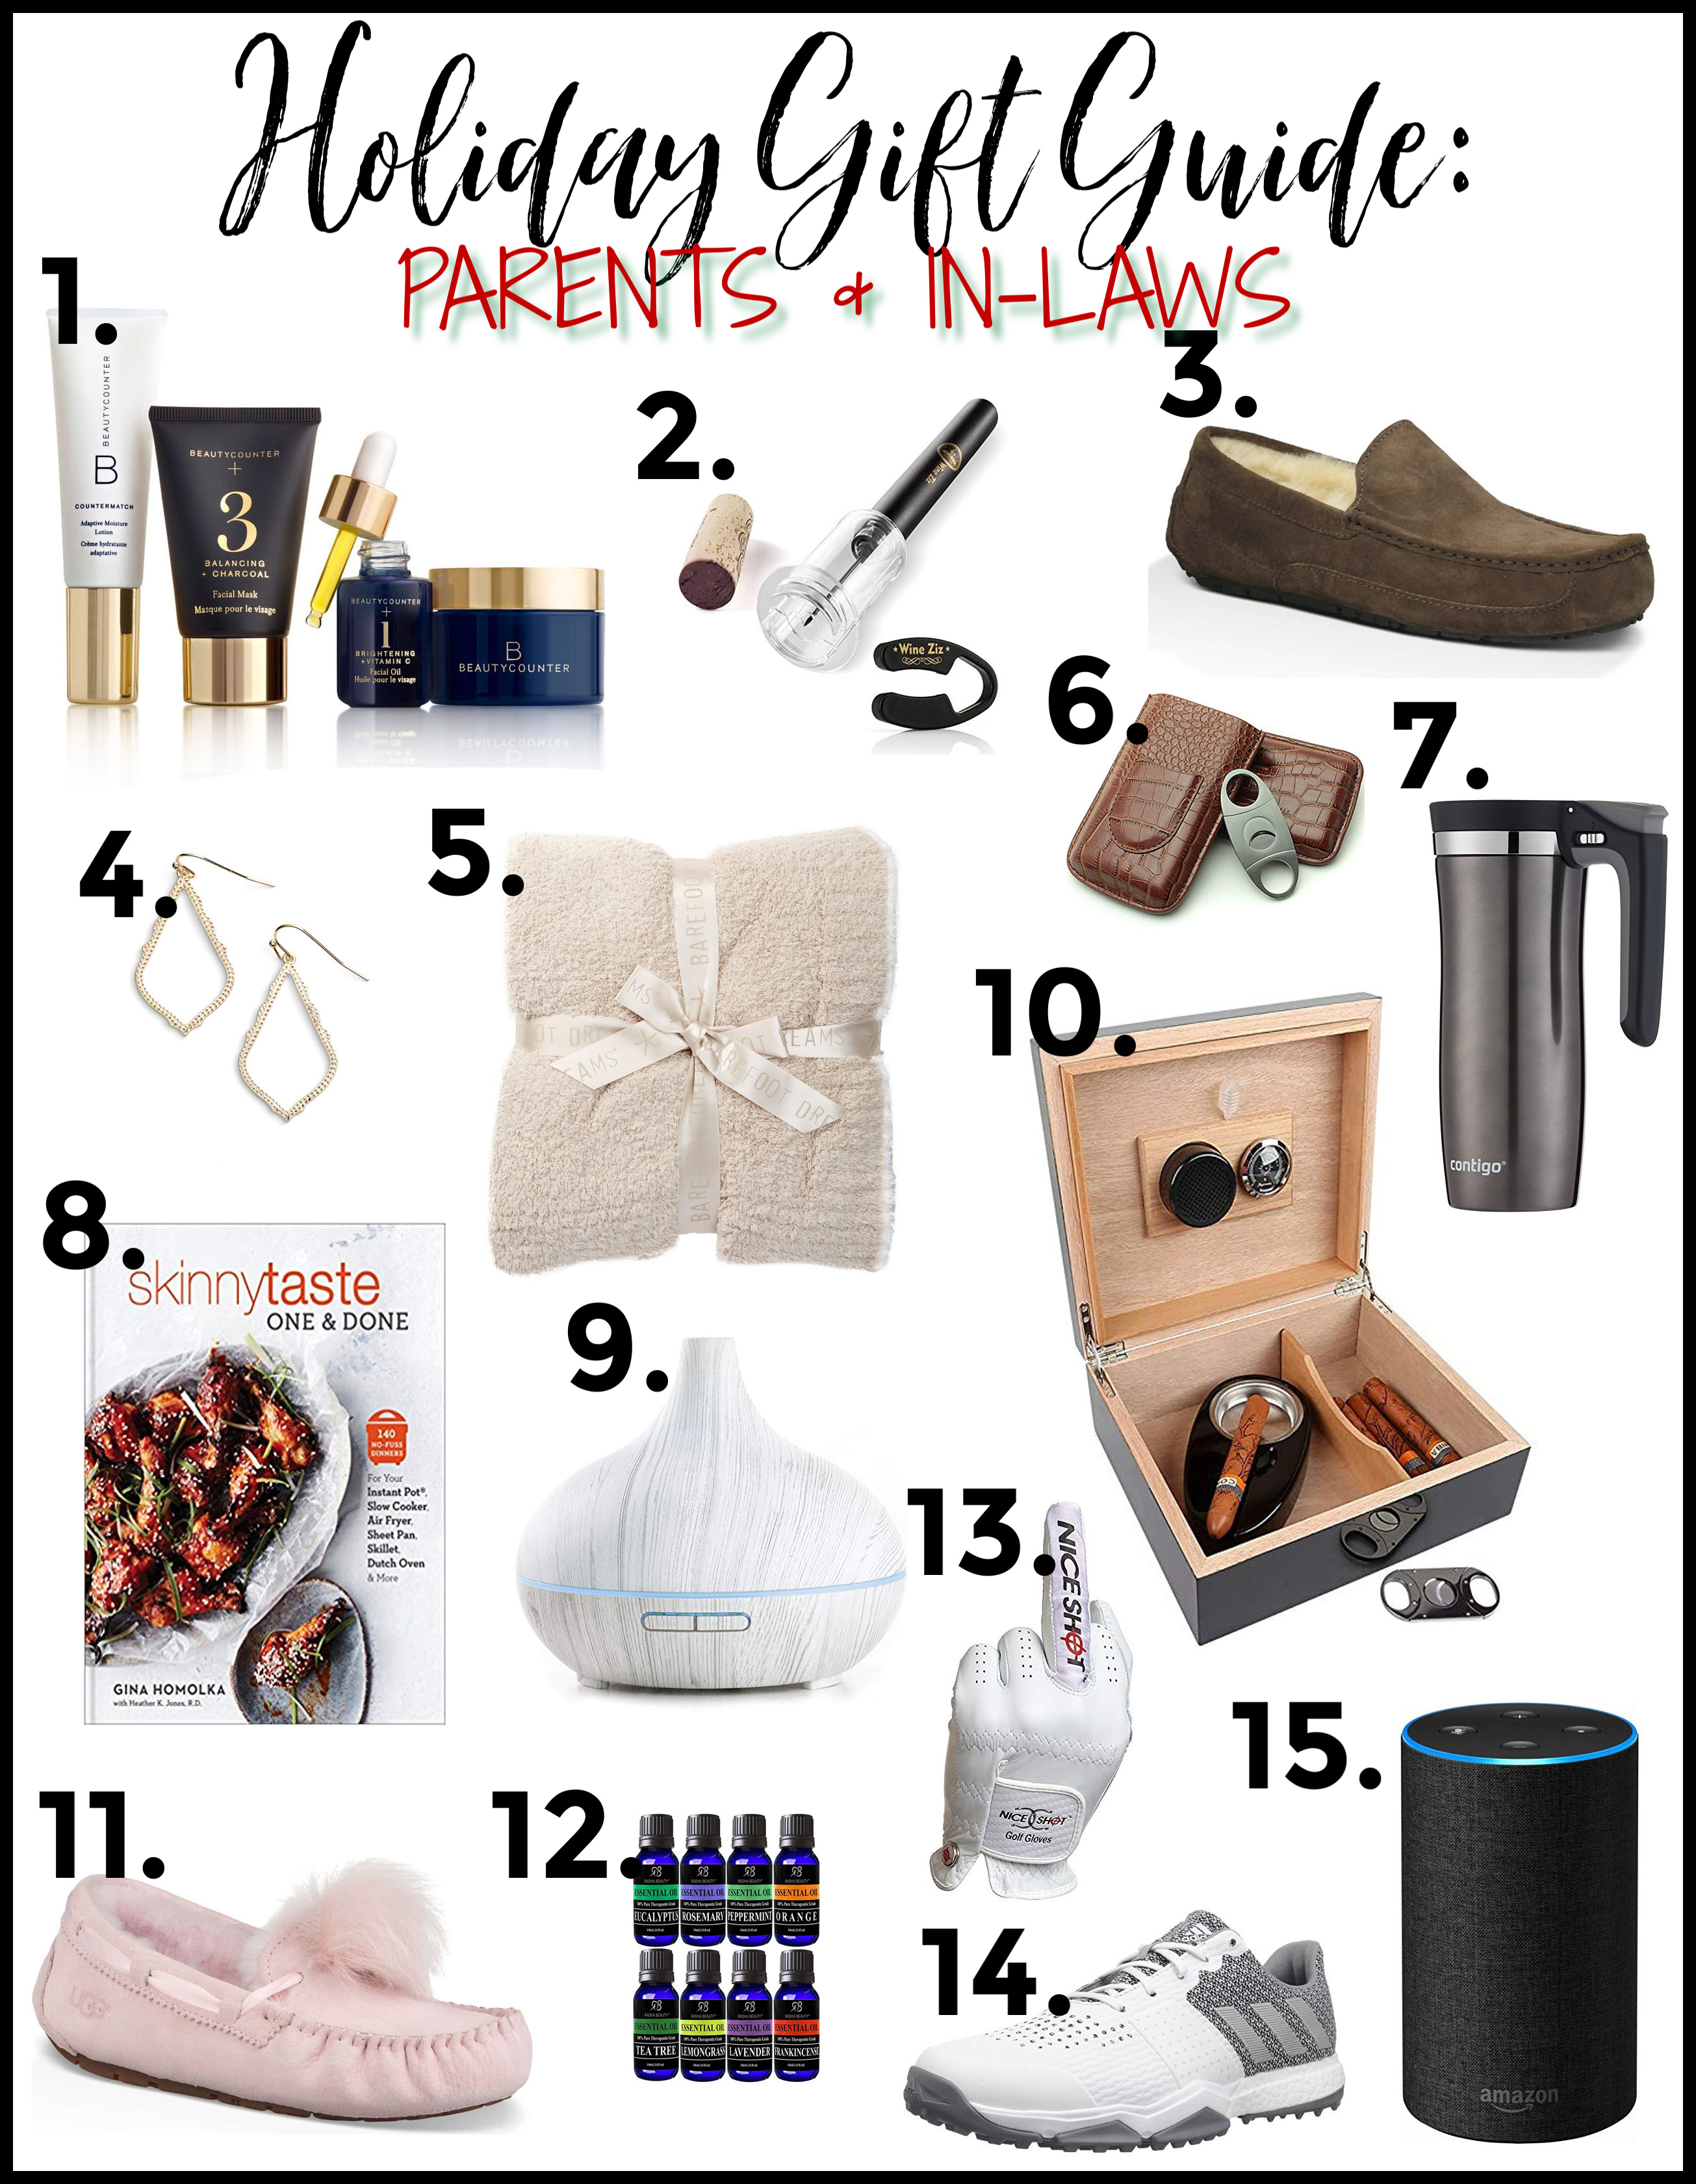 cool gifts for your parents, parents gift guides, holiday gift guide, what to buy in-laws, what to buy parents